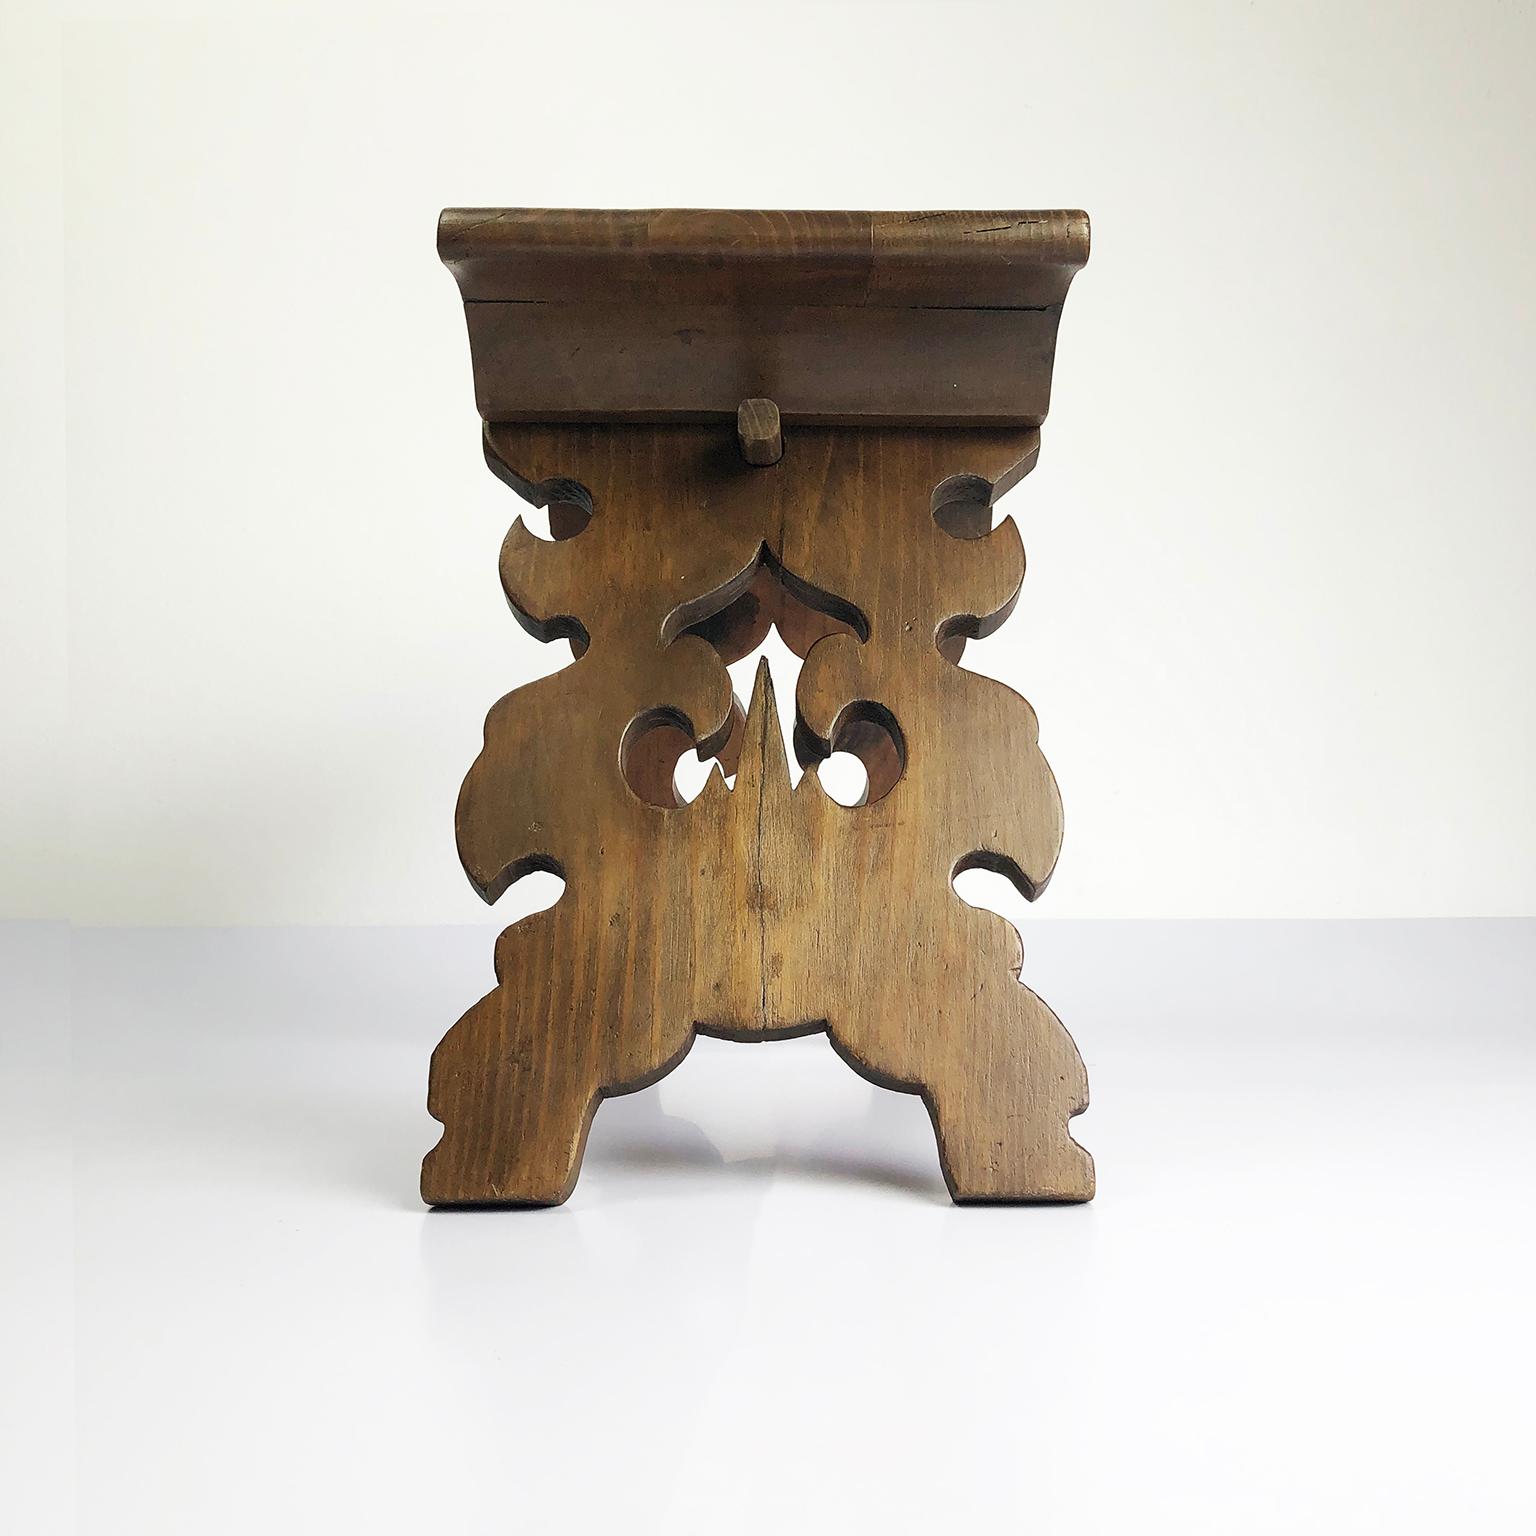 Mid-20th Century Rare Stool by Mexican Mid-Century Modernist Don Shoemaker For Sale